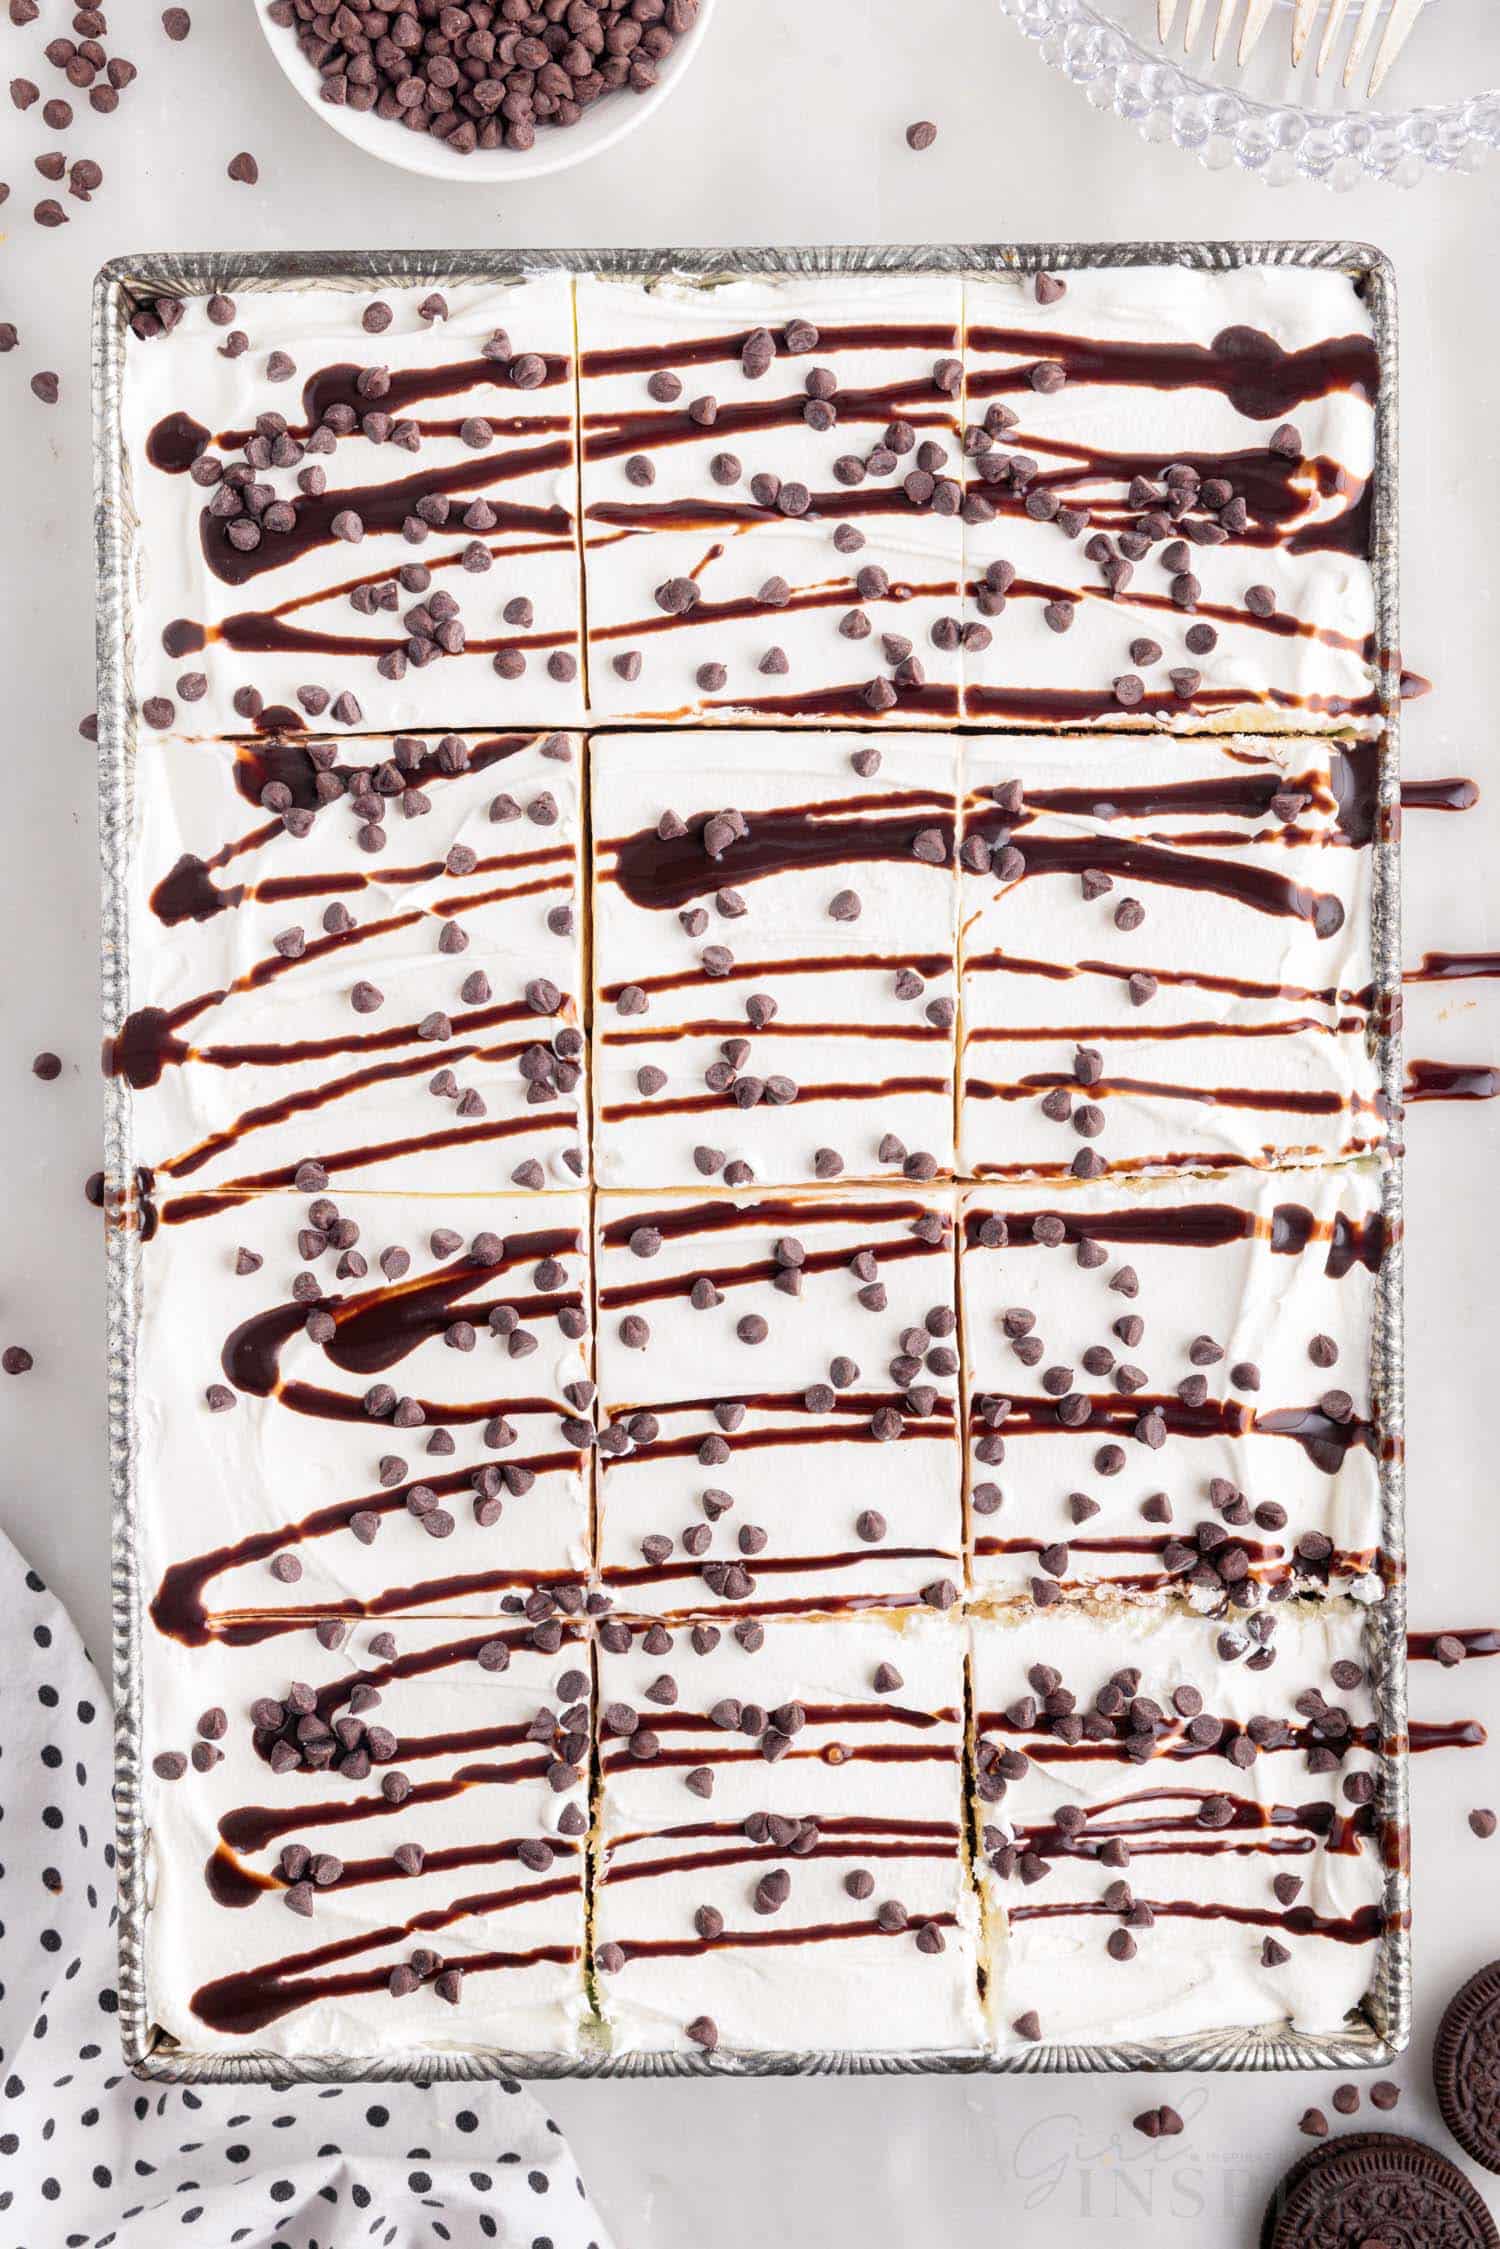 top view of mint chocolate chip ice cream cake cut into slices with hot fudge drizzle and mini chocolate chips in 9x13 pan